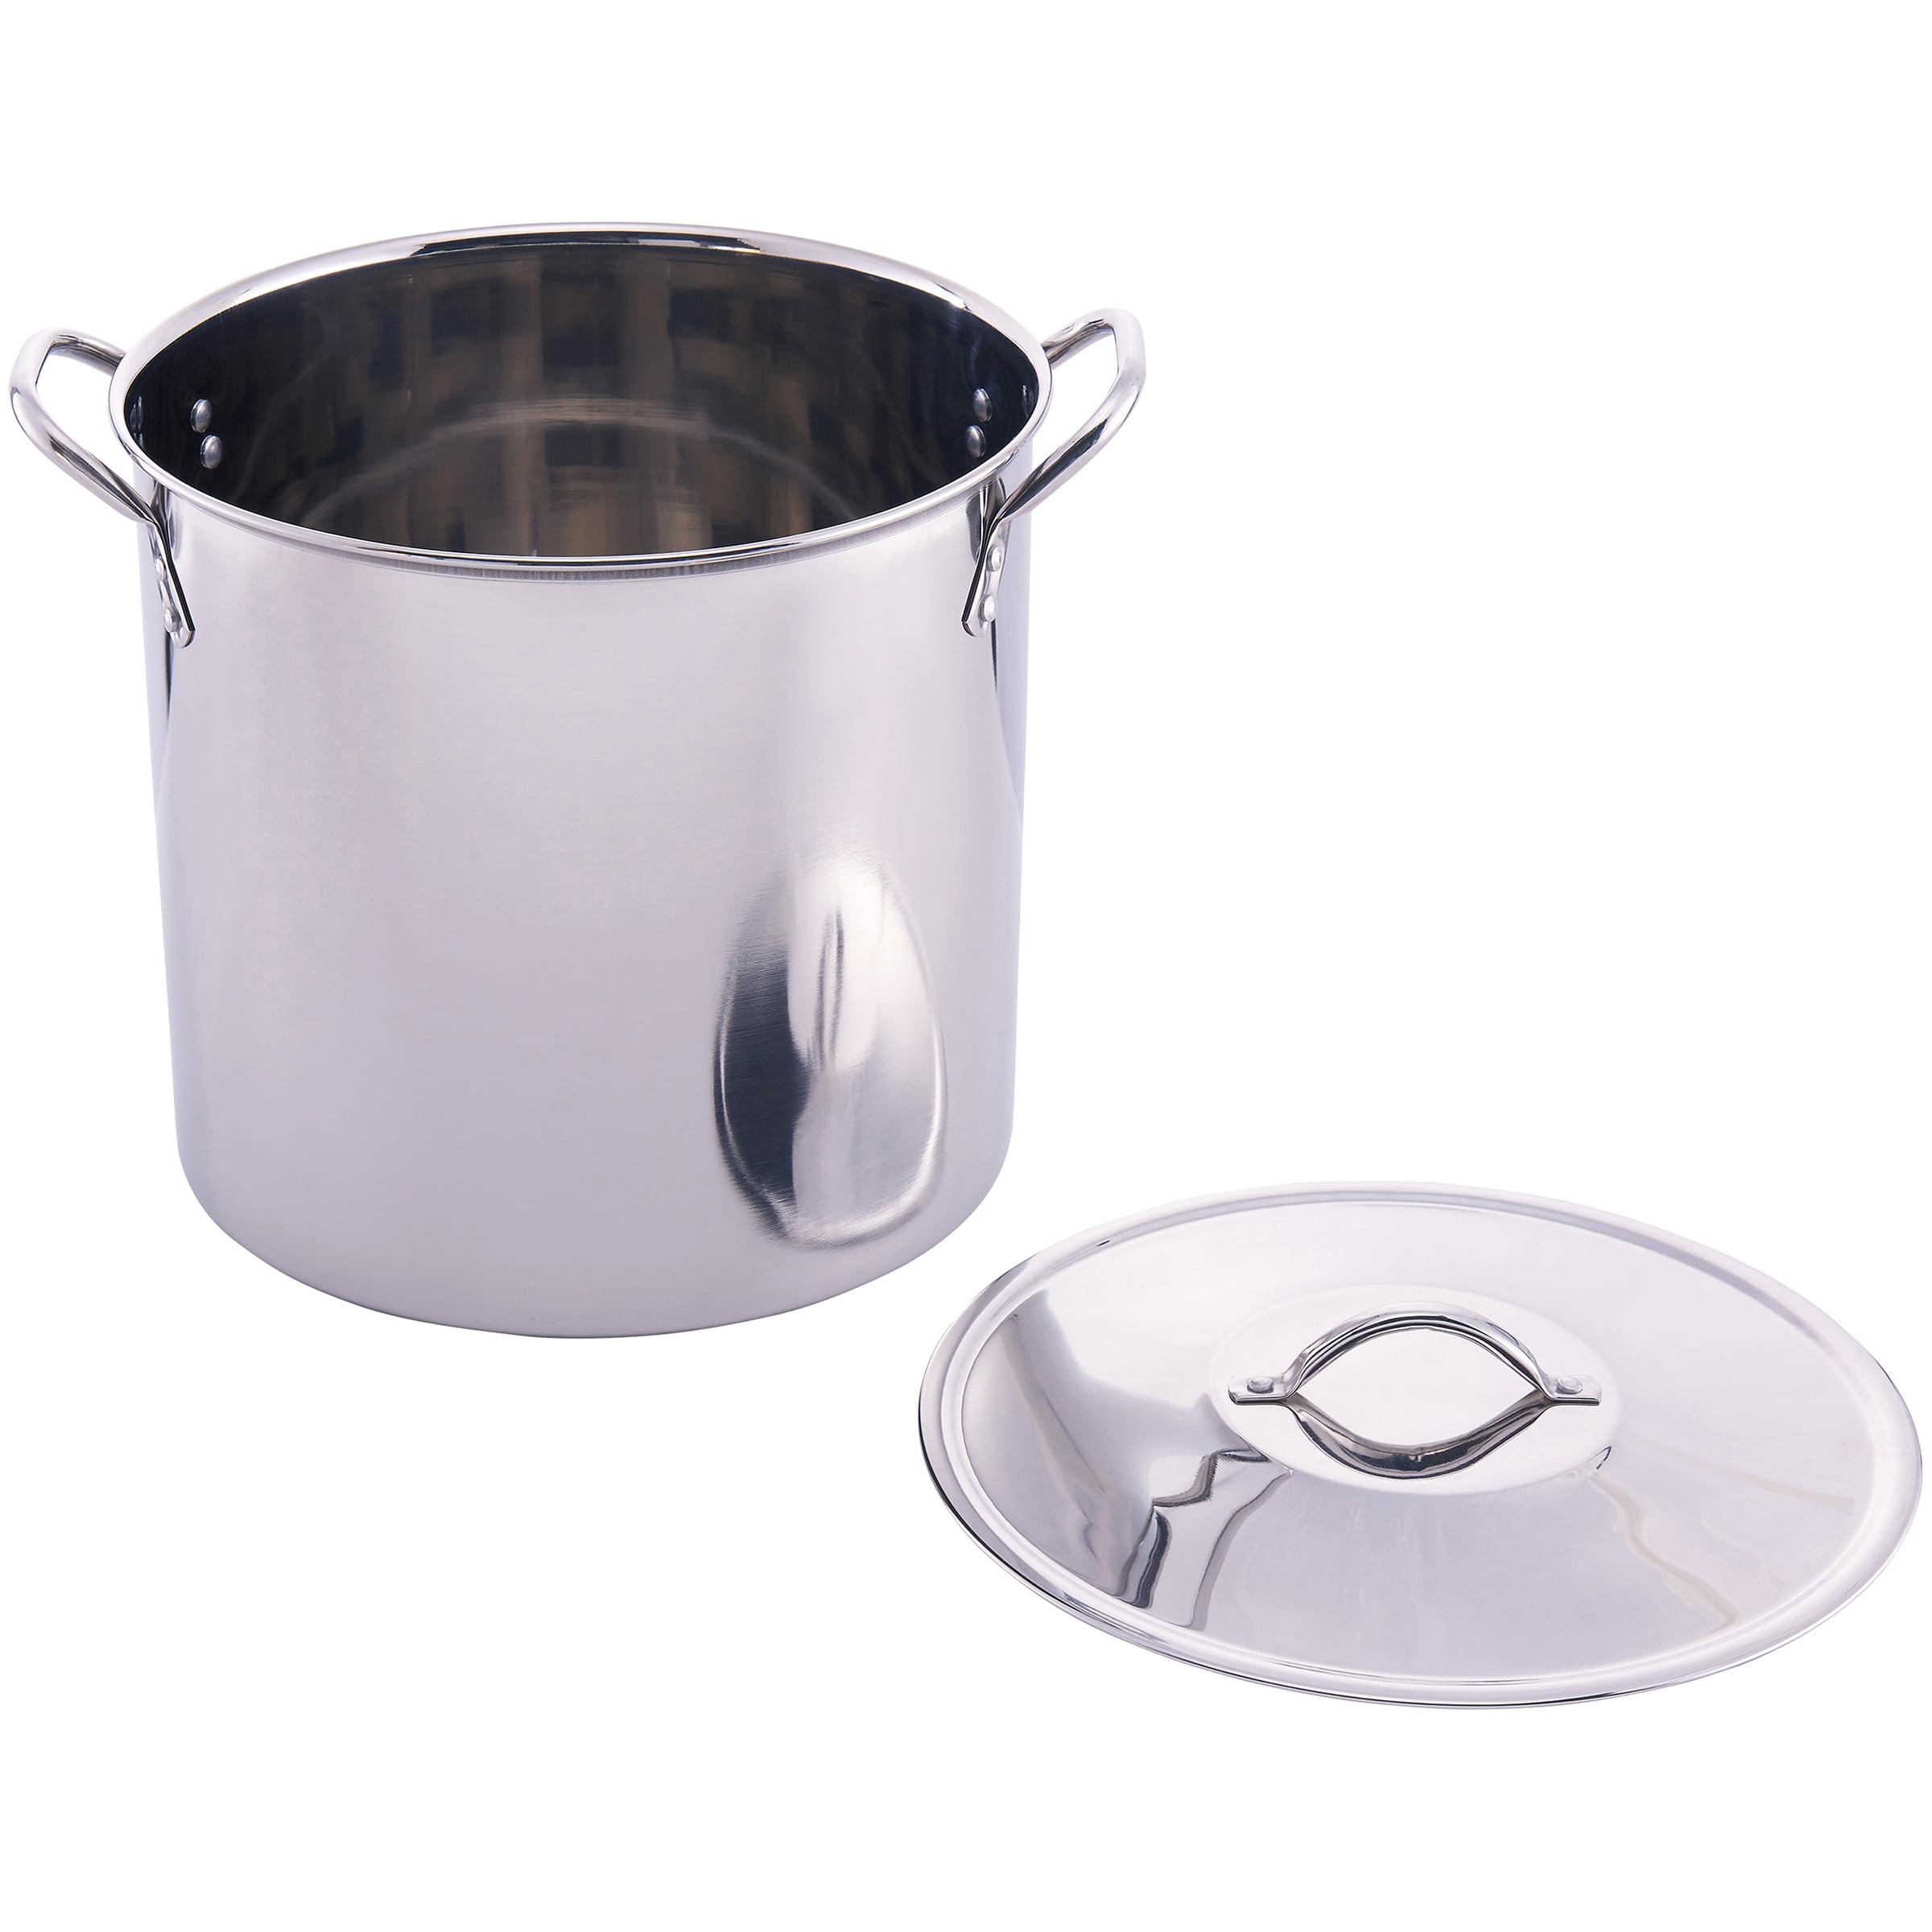 Mainstays 16-Qt Stainless Steel Stock Pot with Metal Lid New | eBay Mainstays Stainless Steel Stock Pot With Lid